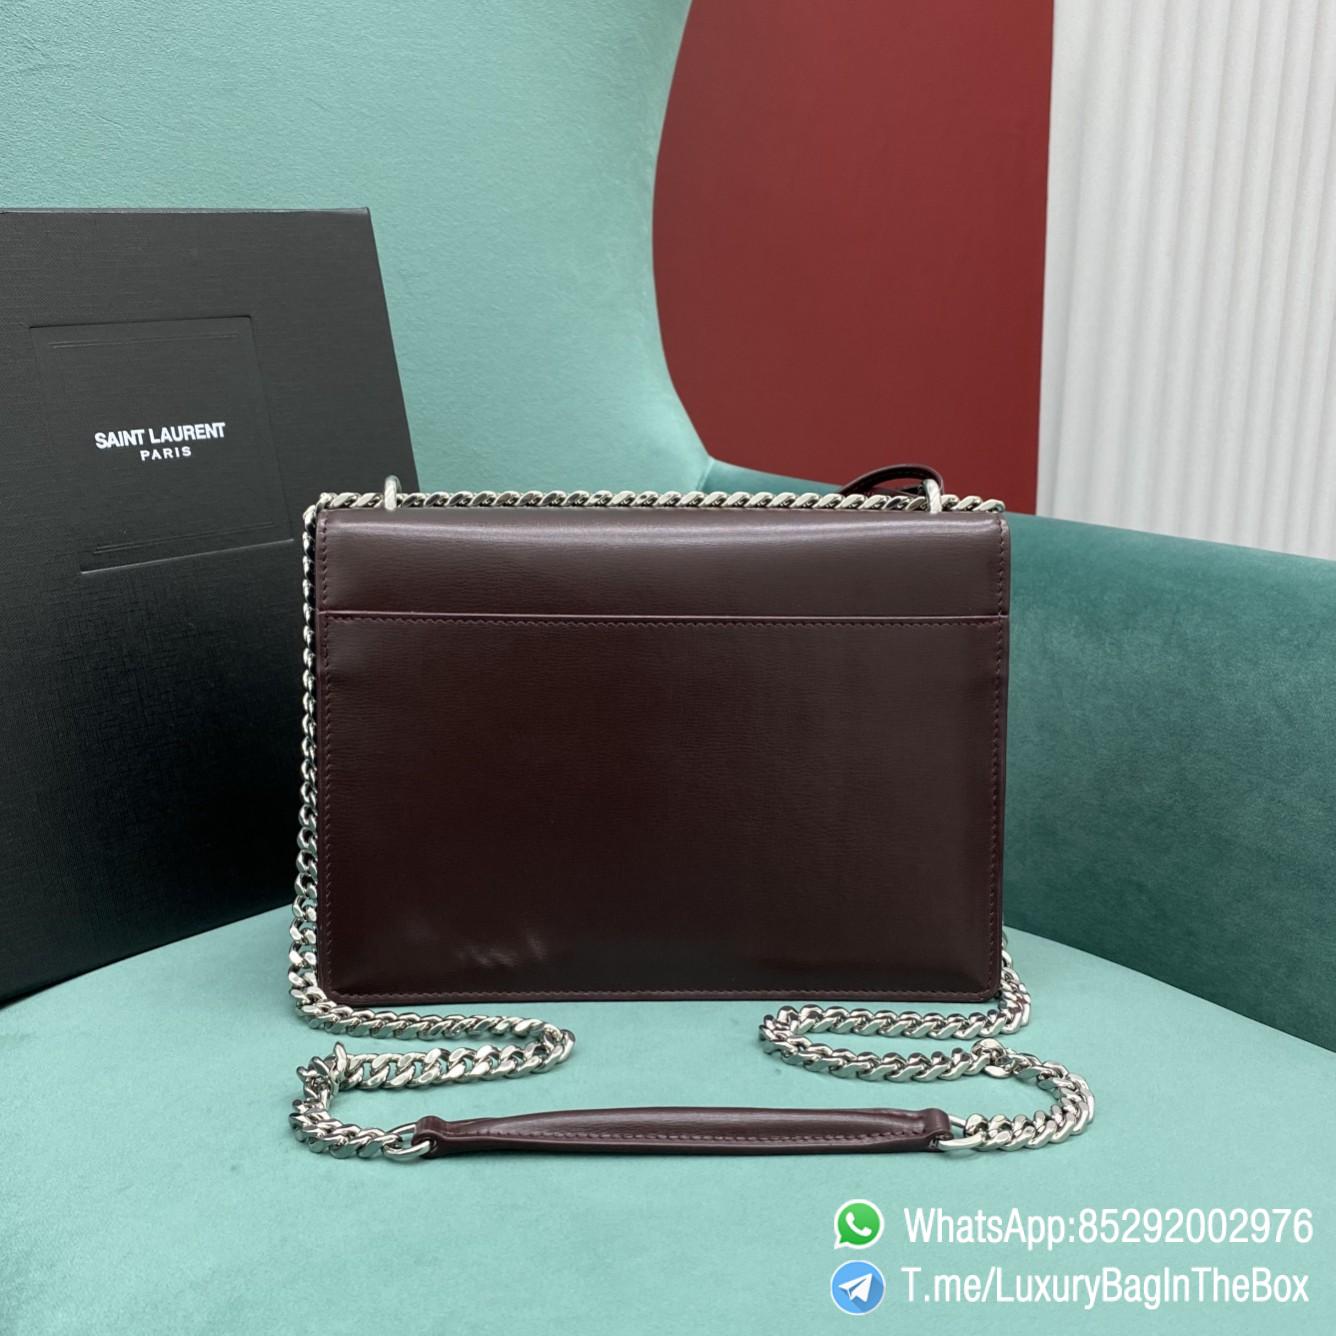 Best Replica YSL Sunset Handbag 442906 Rouge Legion Smooth Leather with Front Flap Chain and Leather Shoulder Strap Silver Metal YSL Initials 03